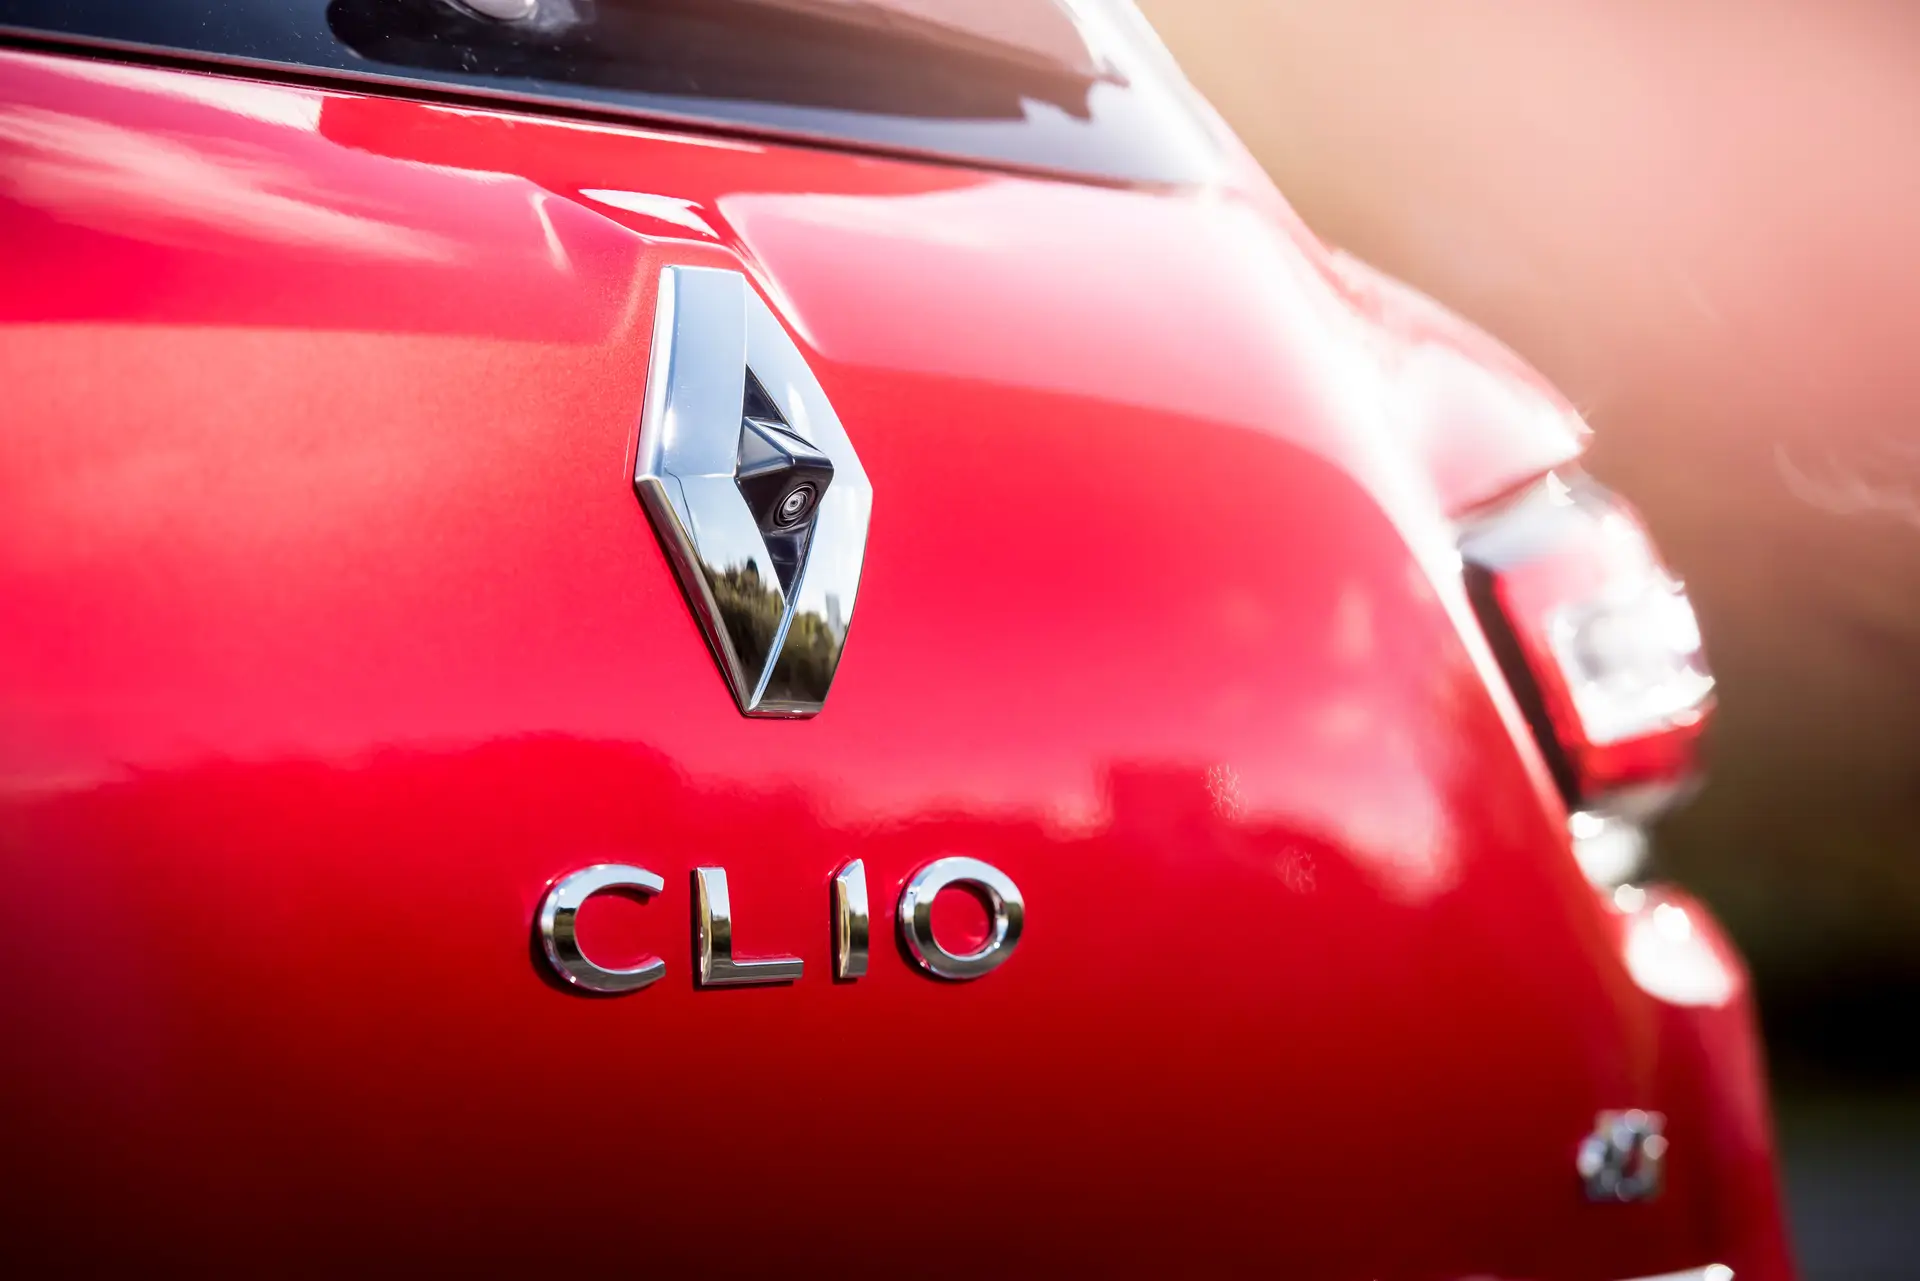 Renault Clio (2013-2019) Review: exterior close up photo of the Renault Clio rear badge